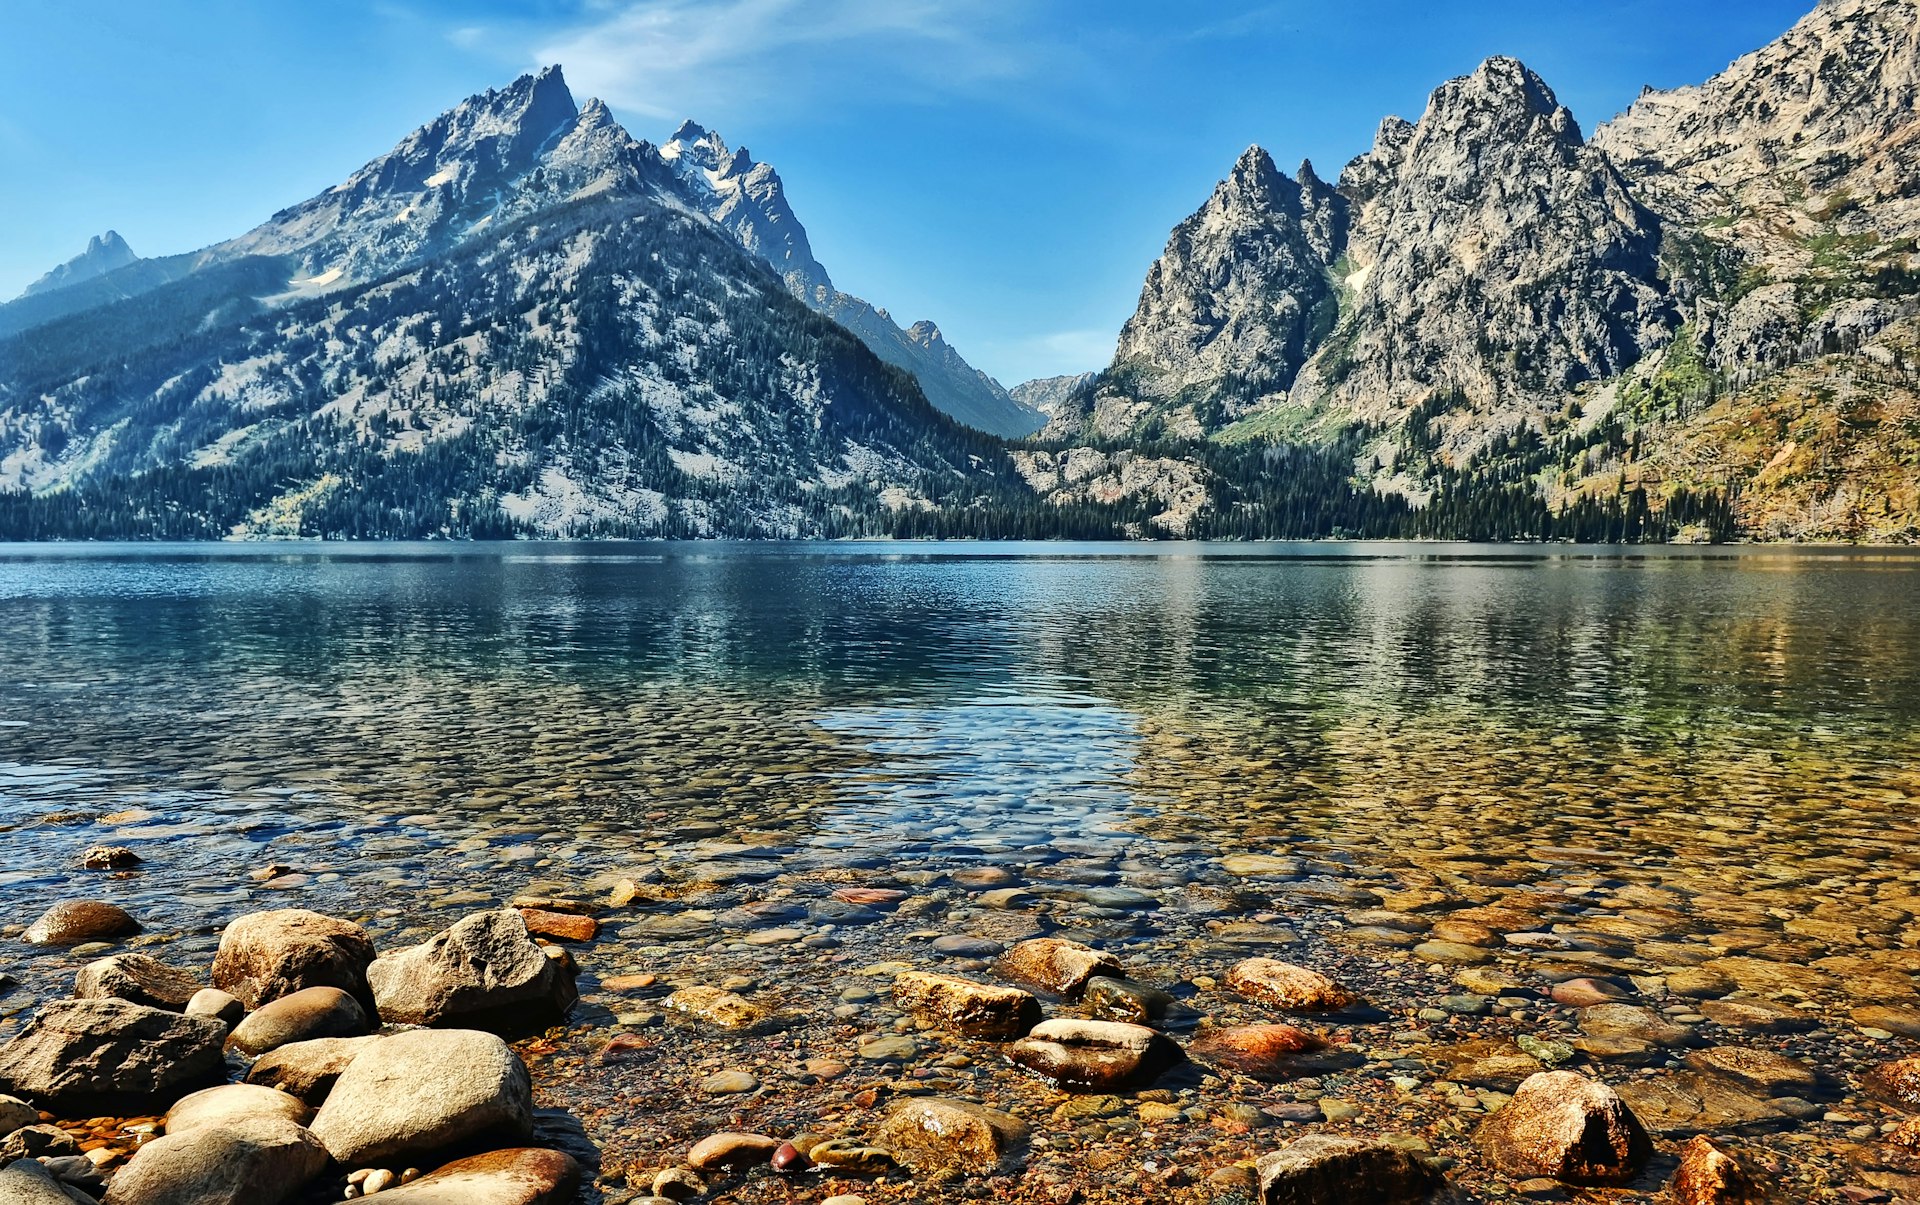 The clear water and stony bottom of Jenny Lake agains the backdrop of the Grand Teton peaks